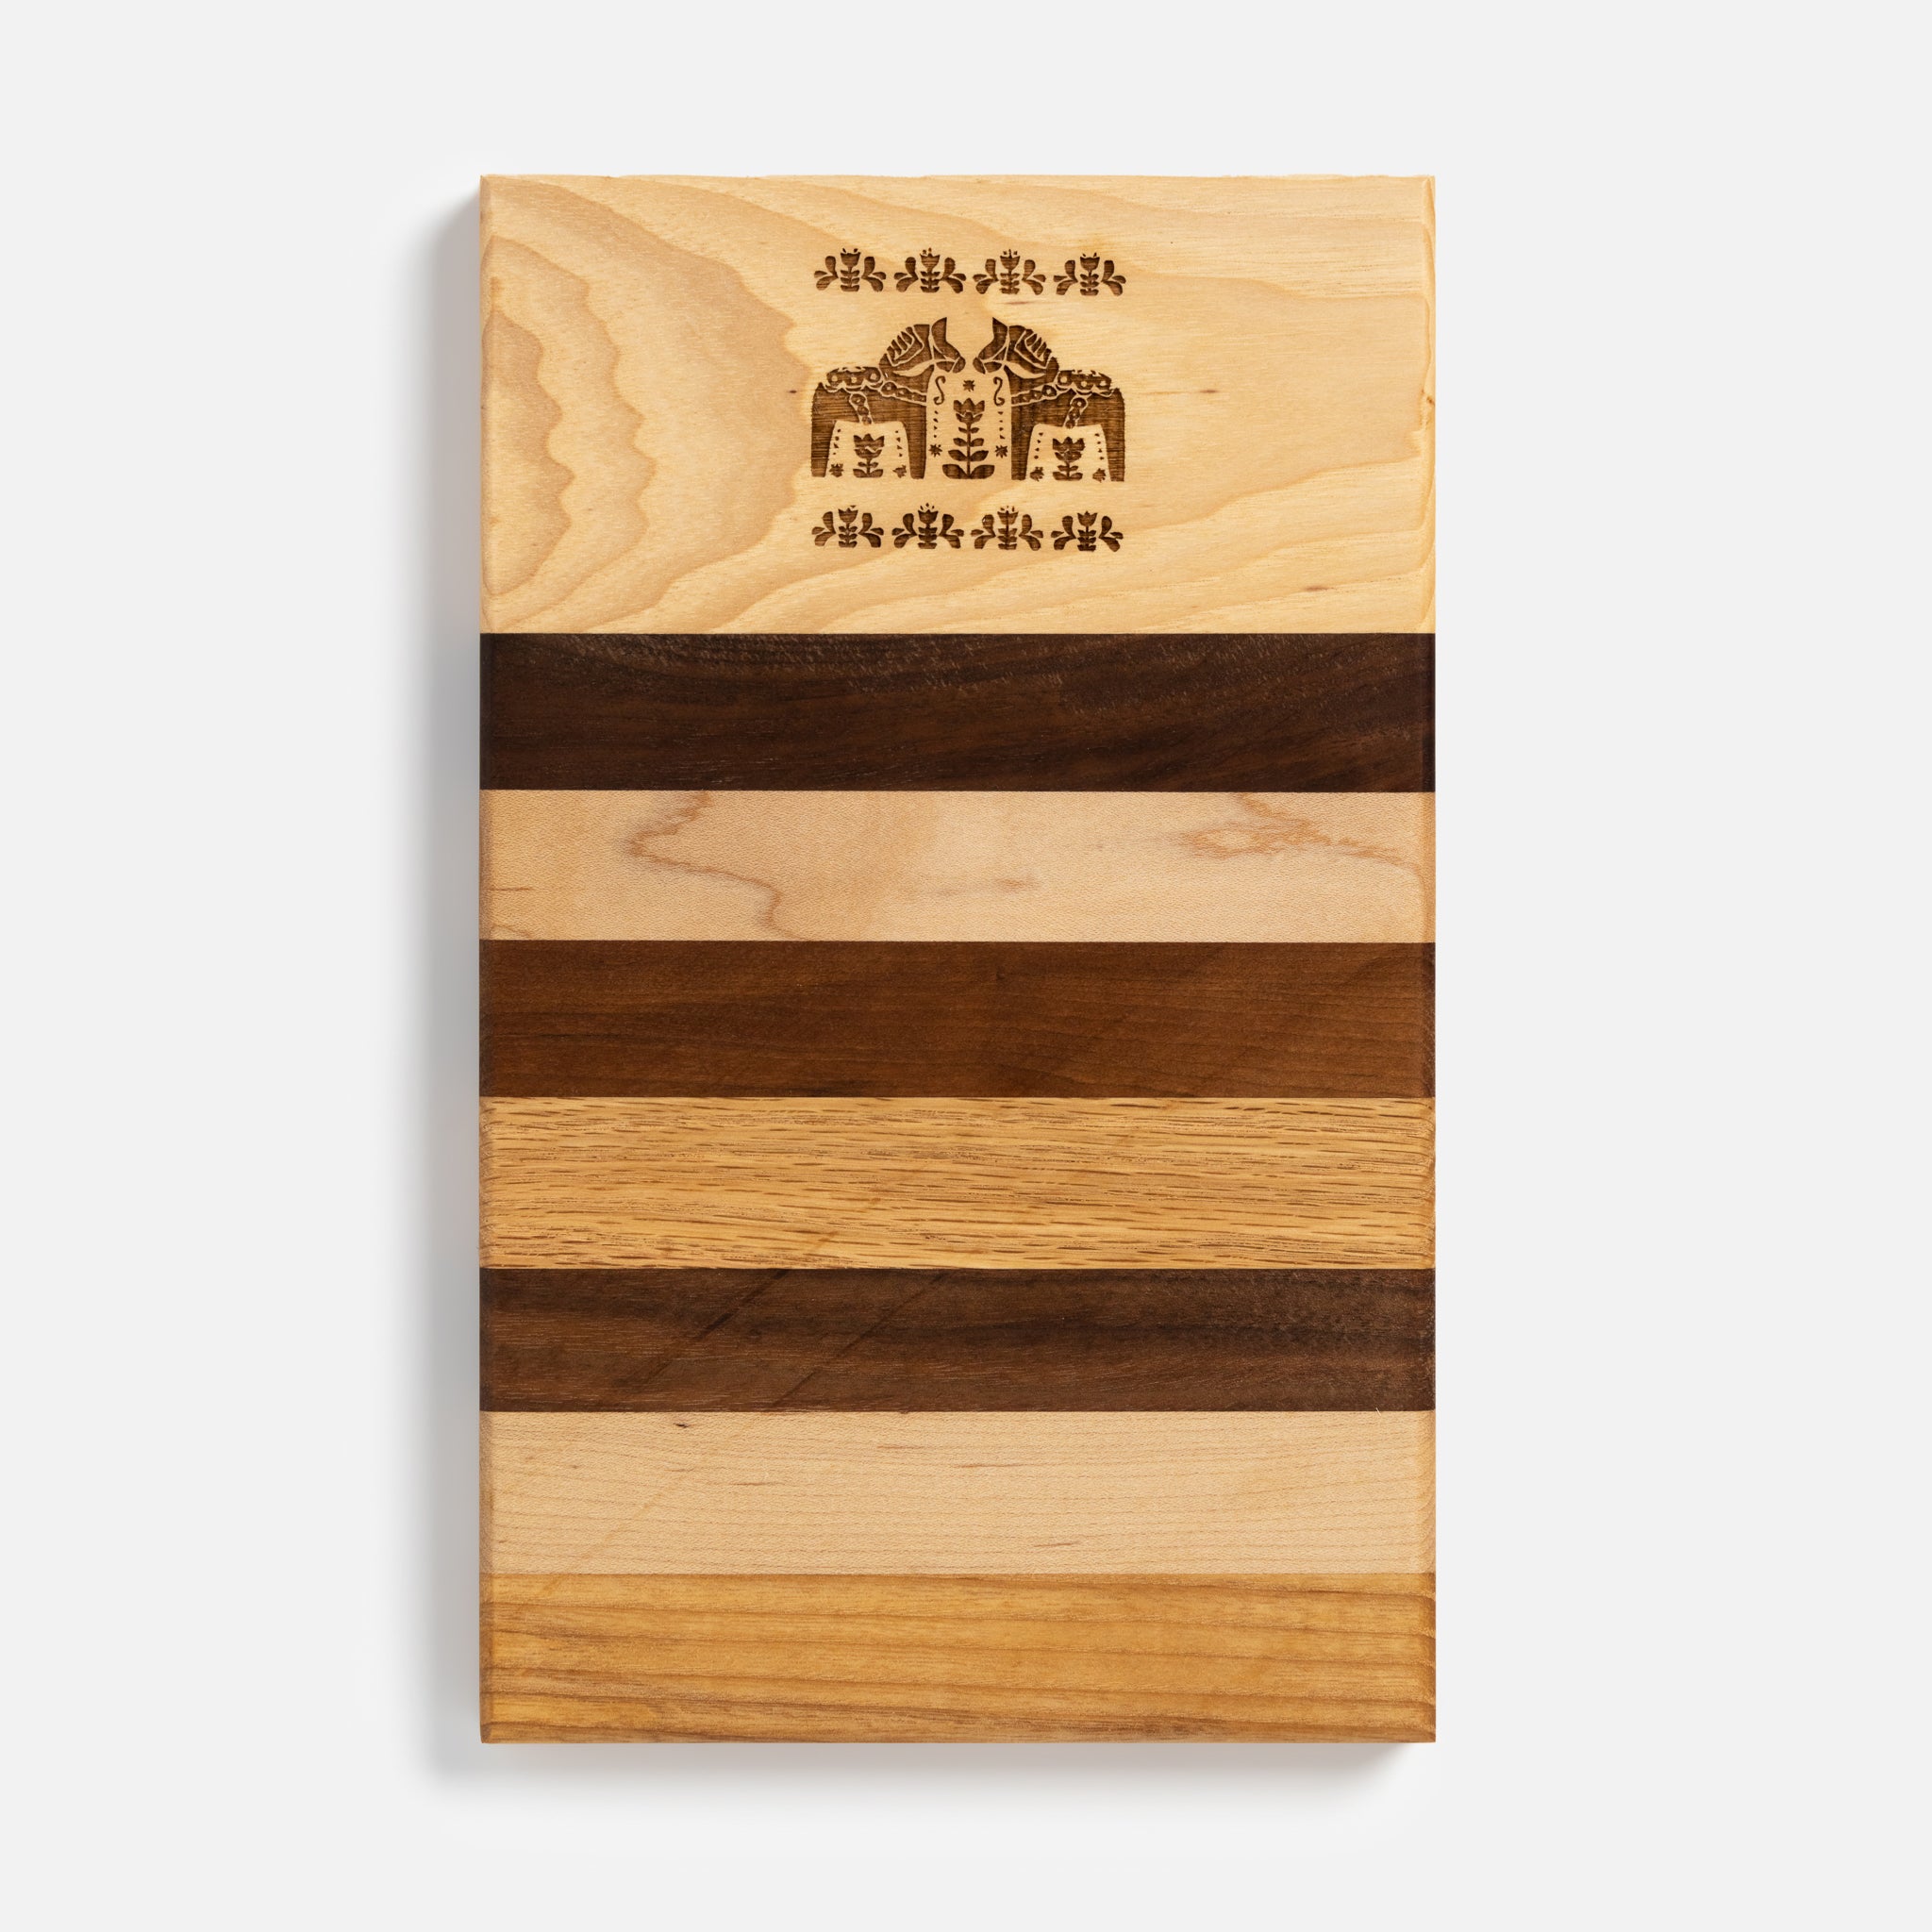 Striped Boards by Women's Sawing Circle